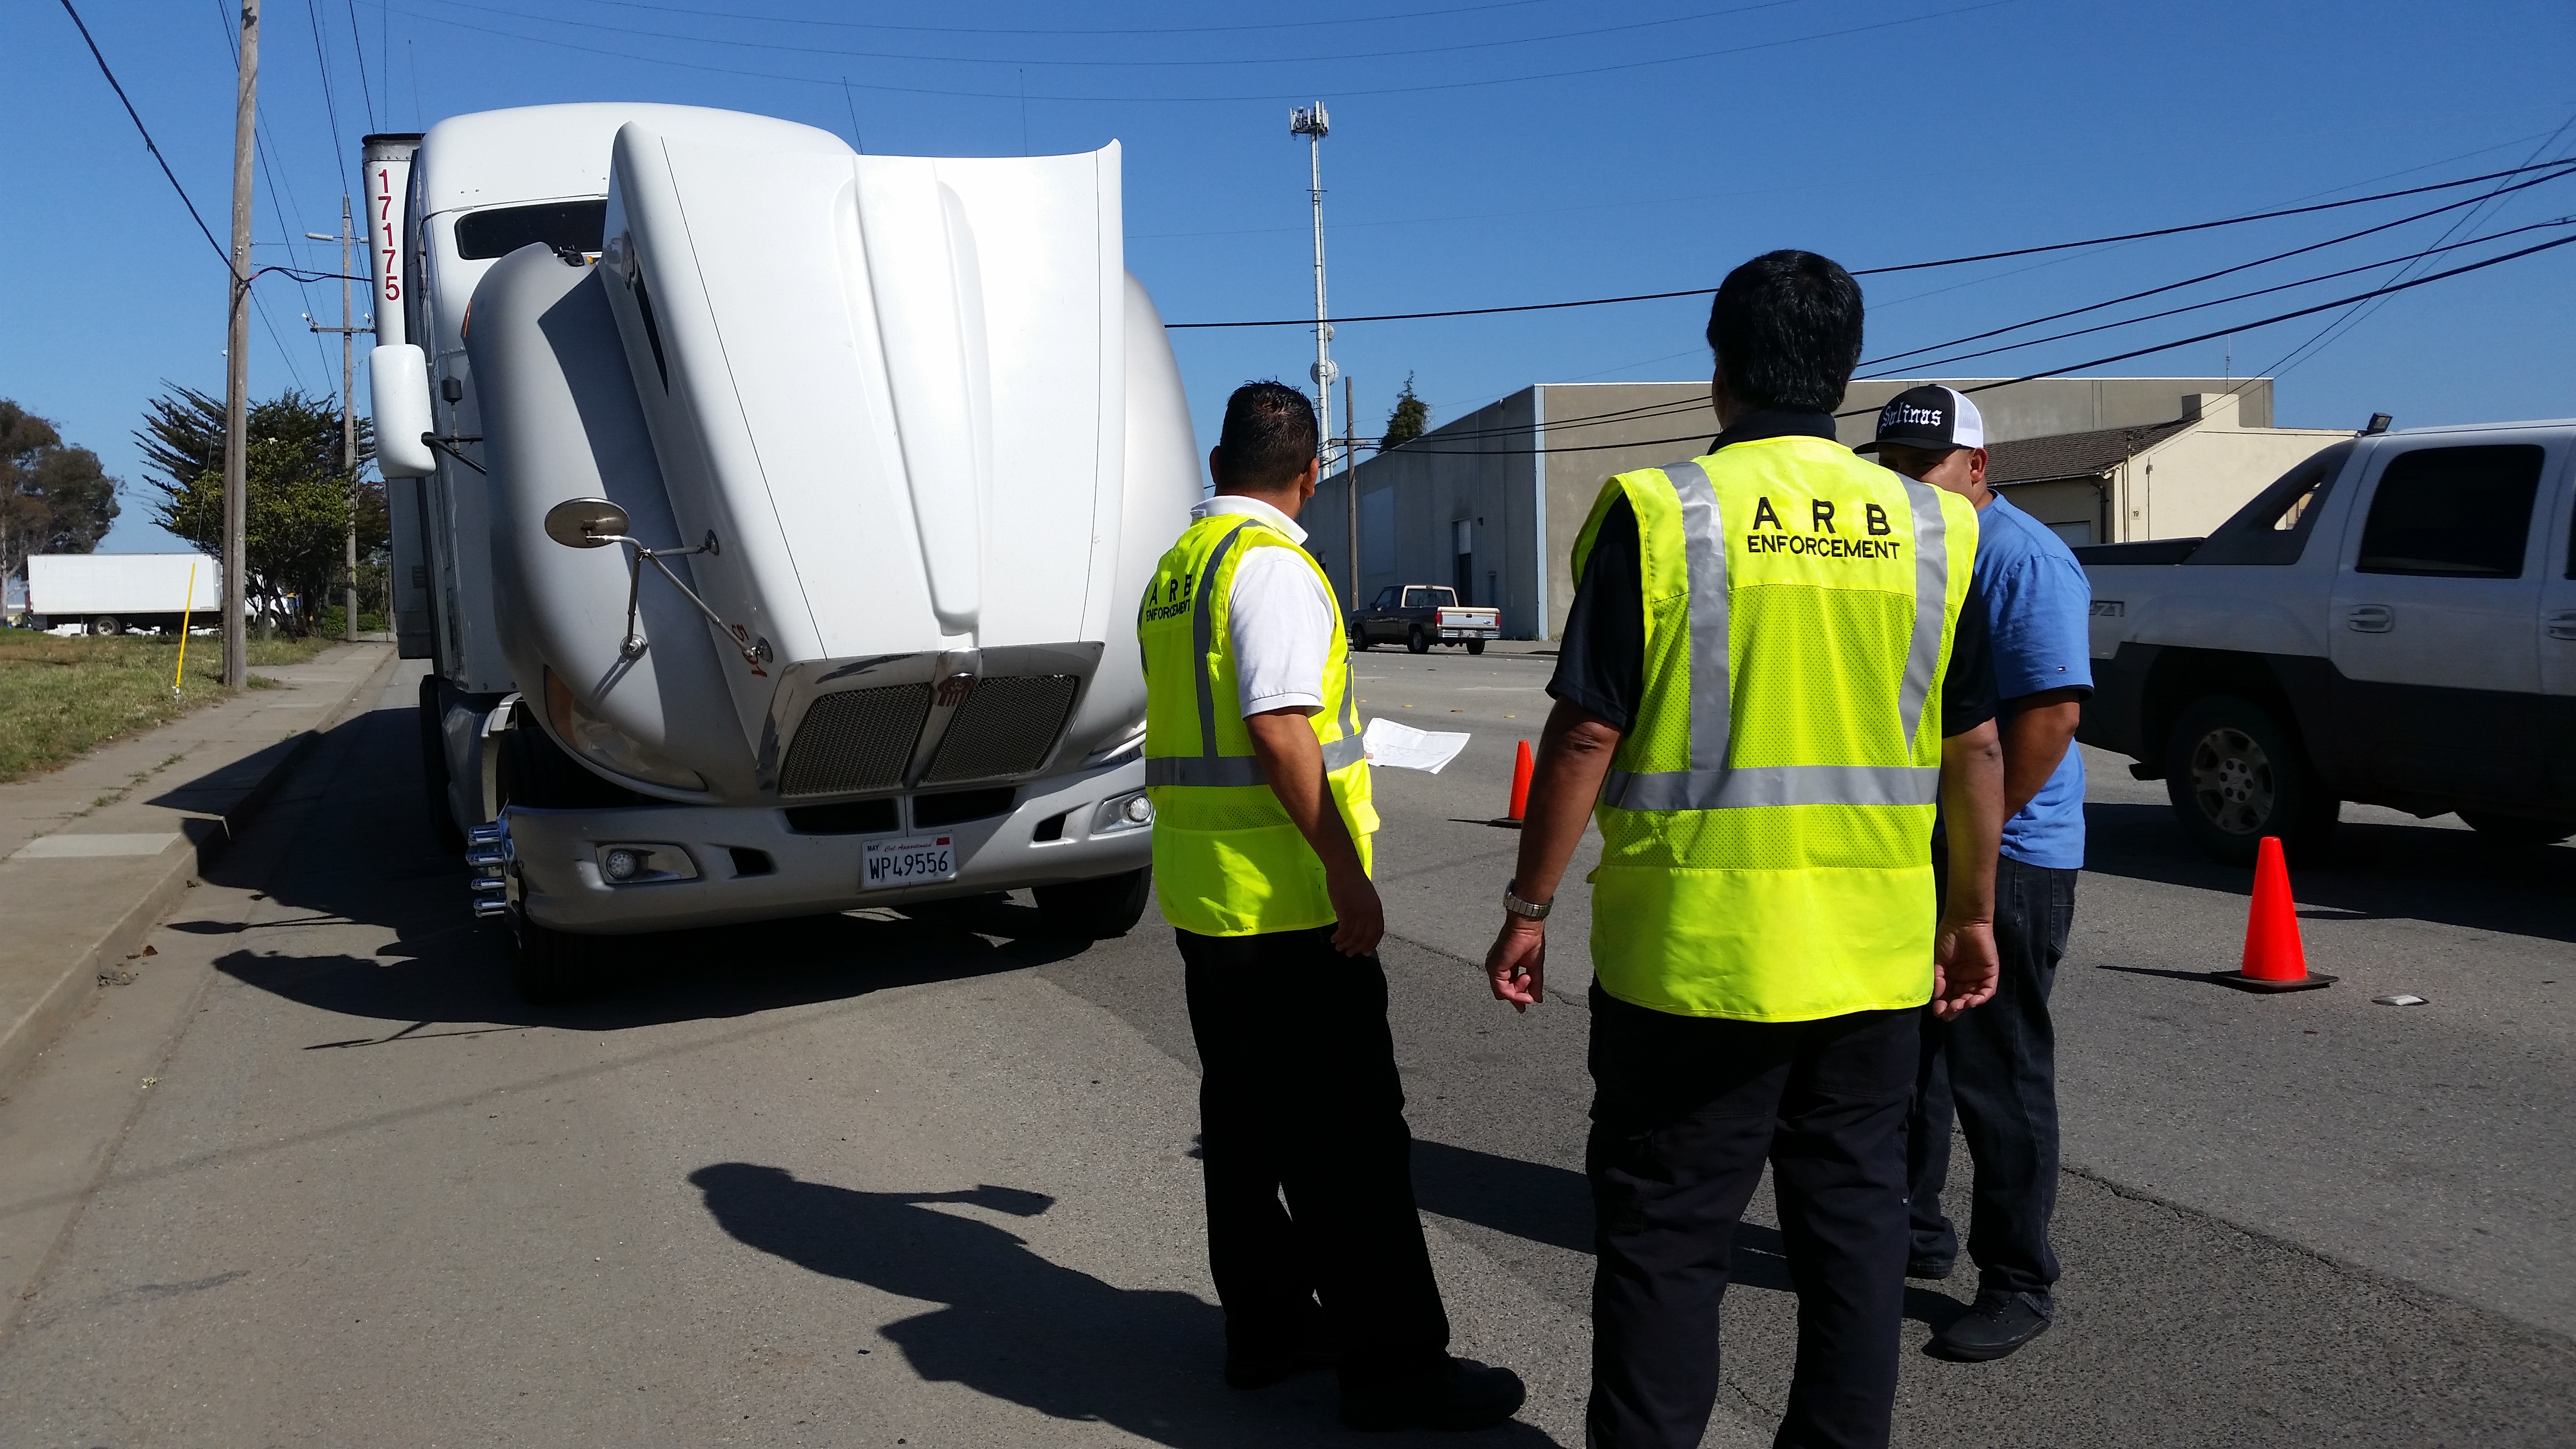 CARB staff members conducting a roadside inspection of a commercial diesel truck